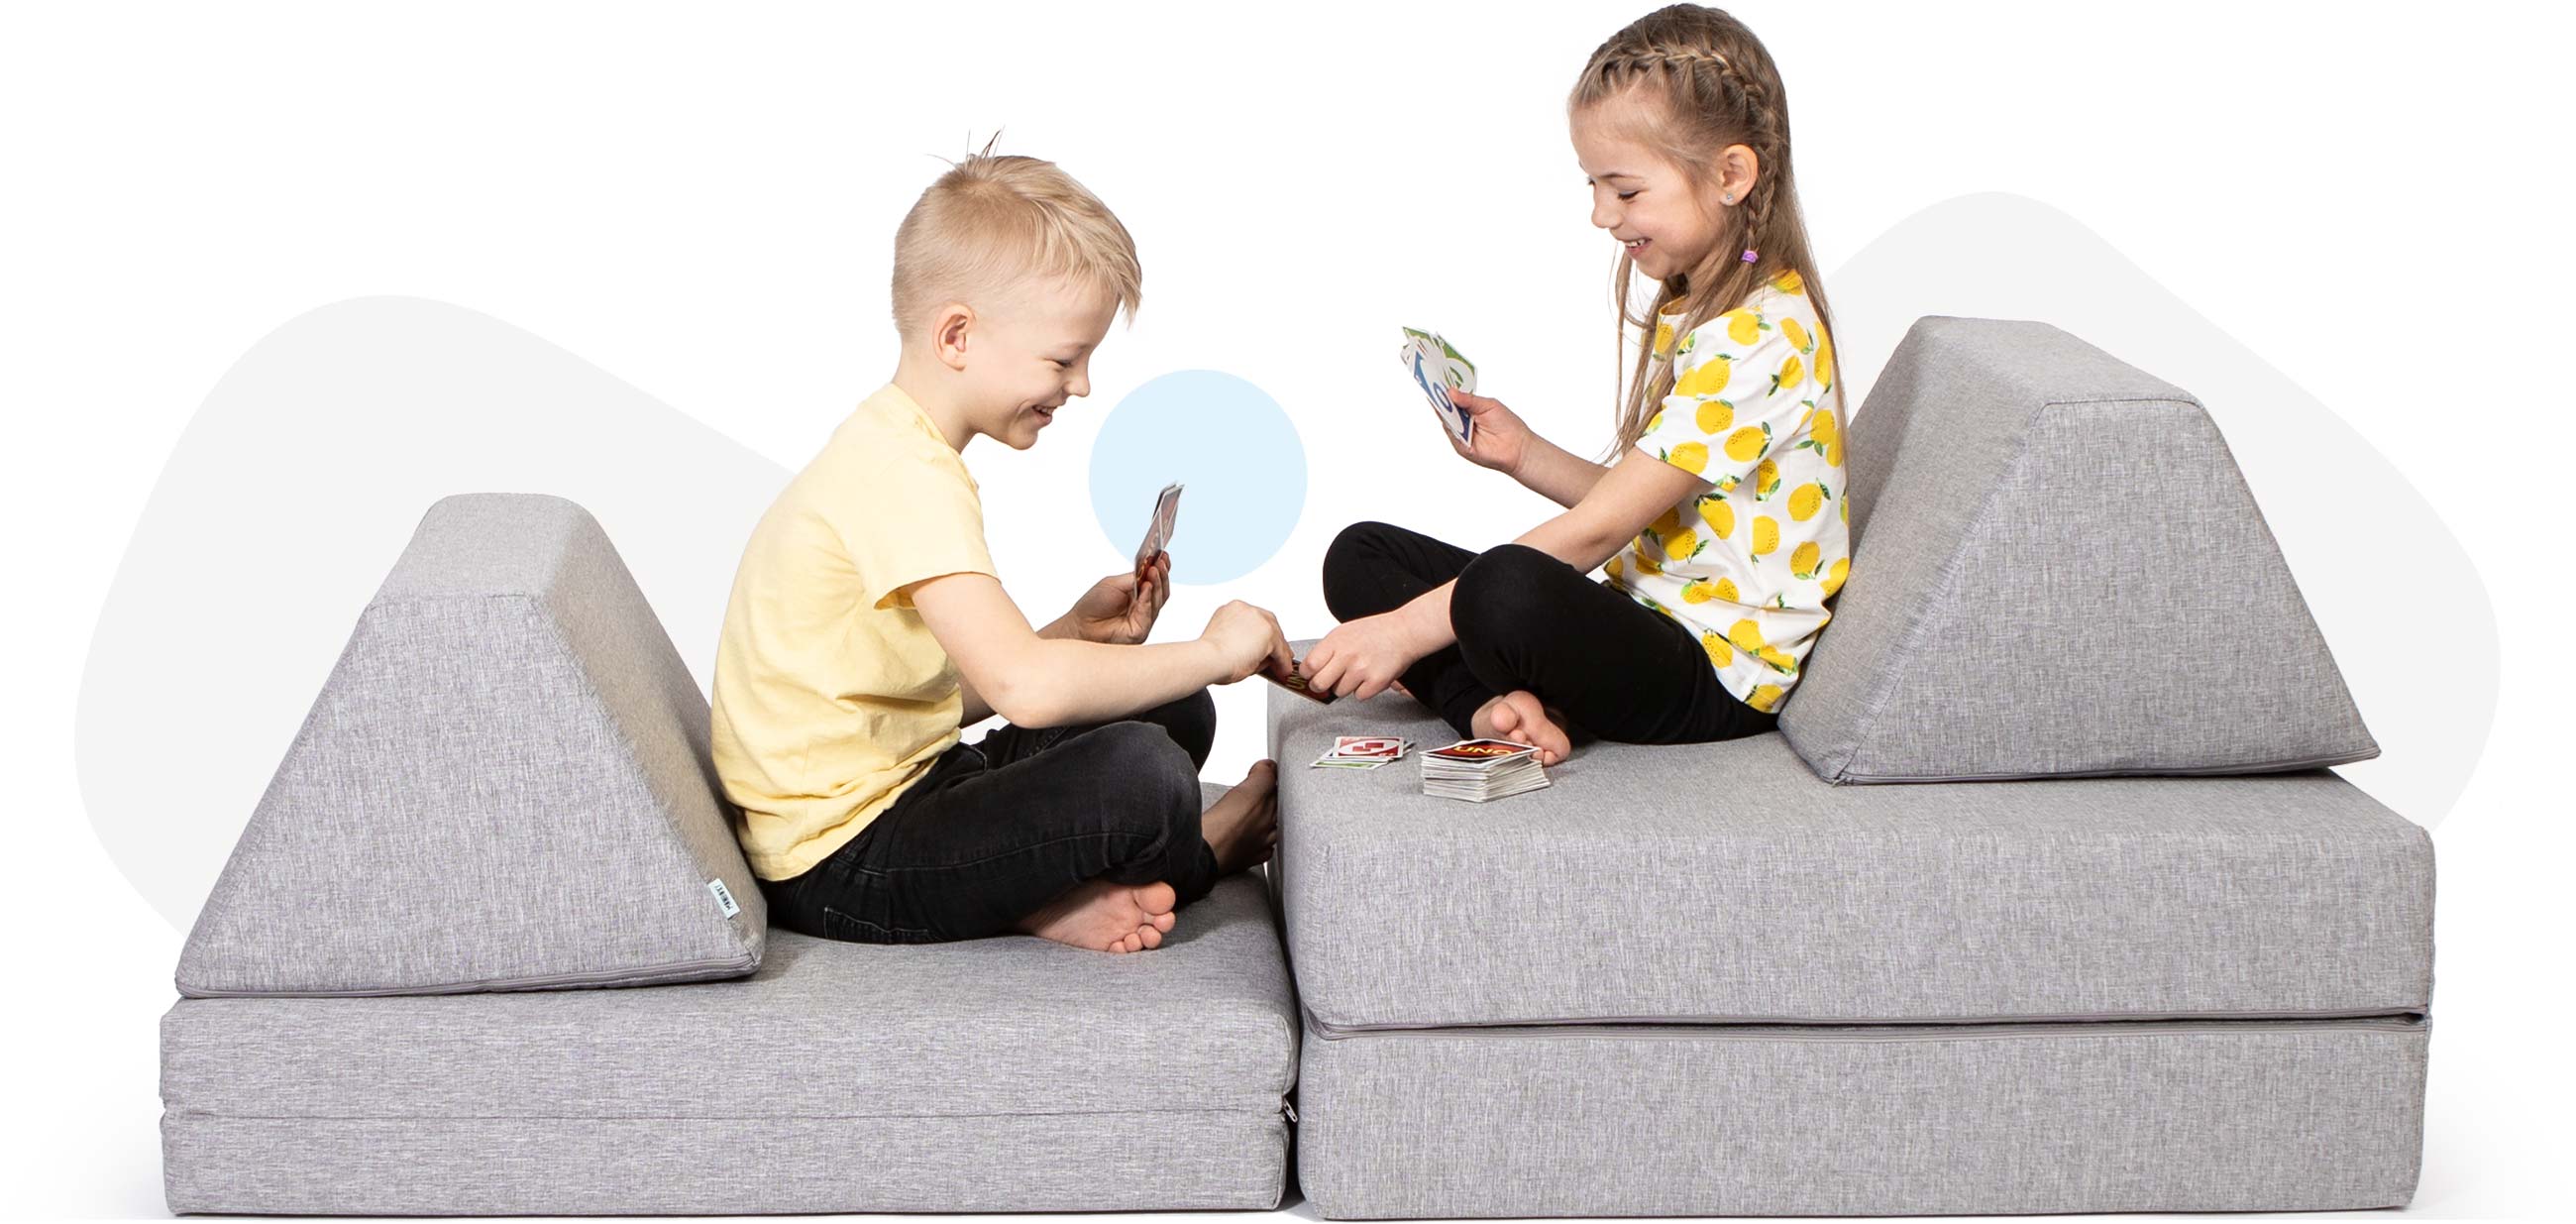 Kids sitting and playing cards on a grey Monboxy toddler couch set